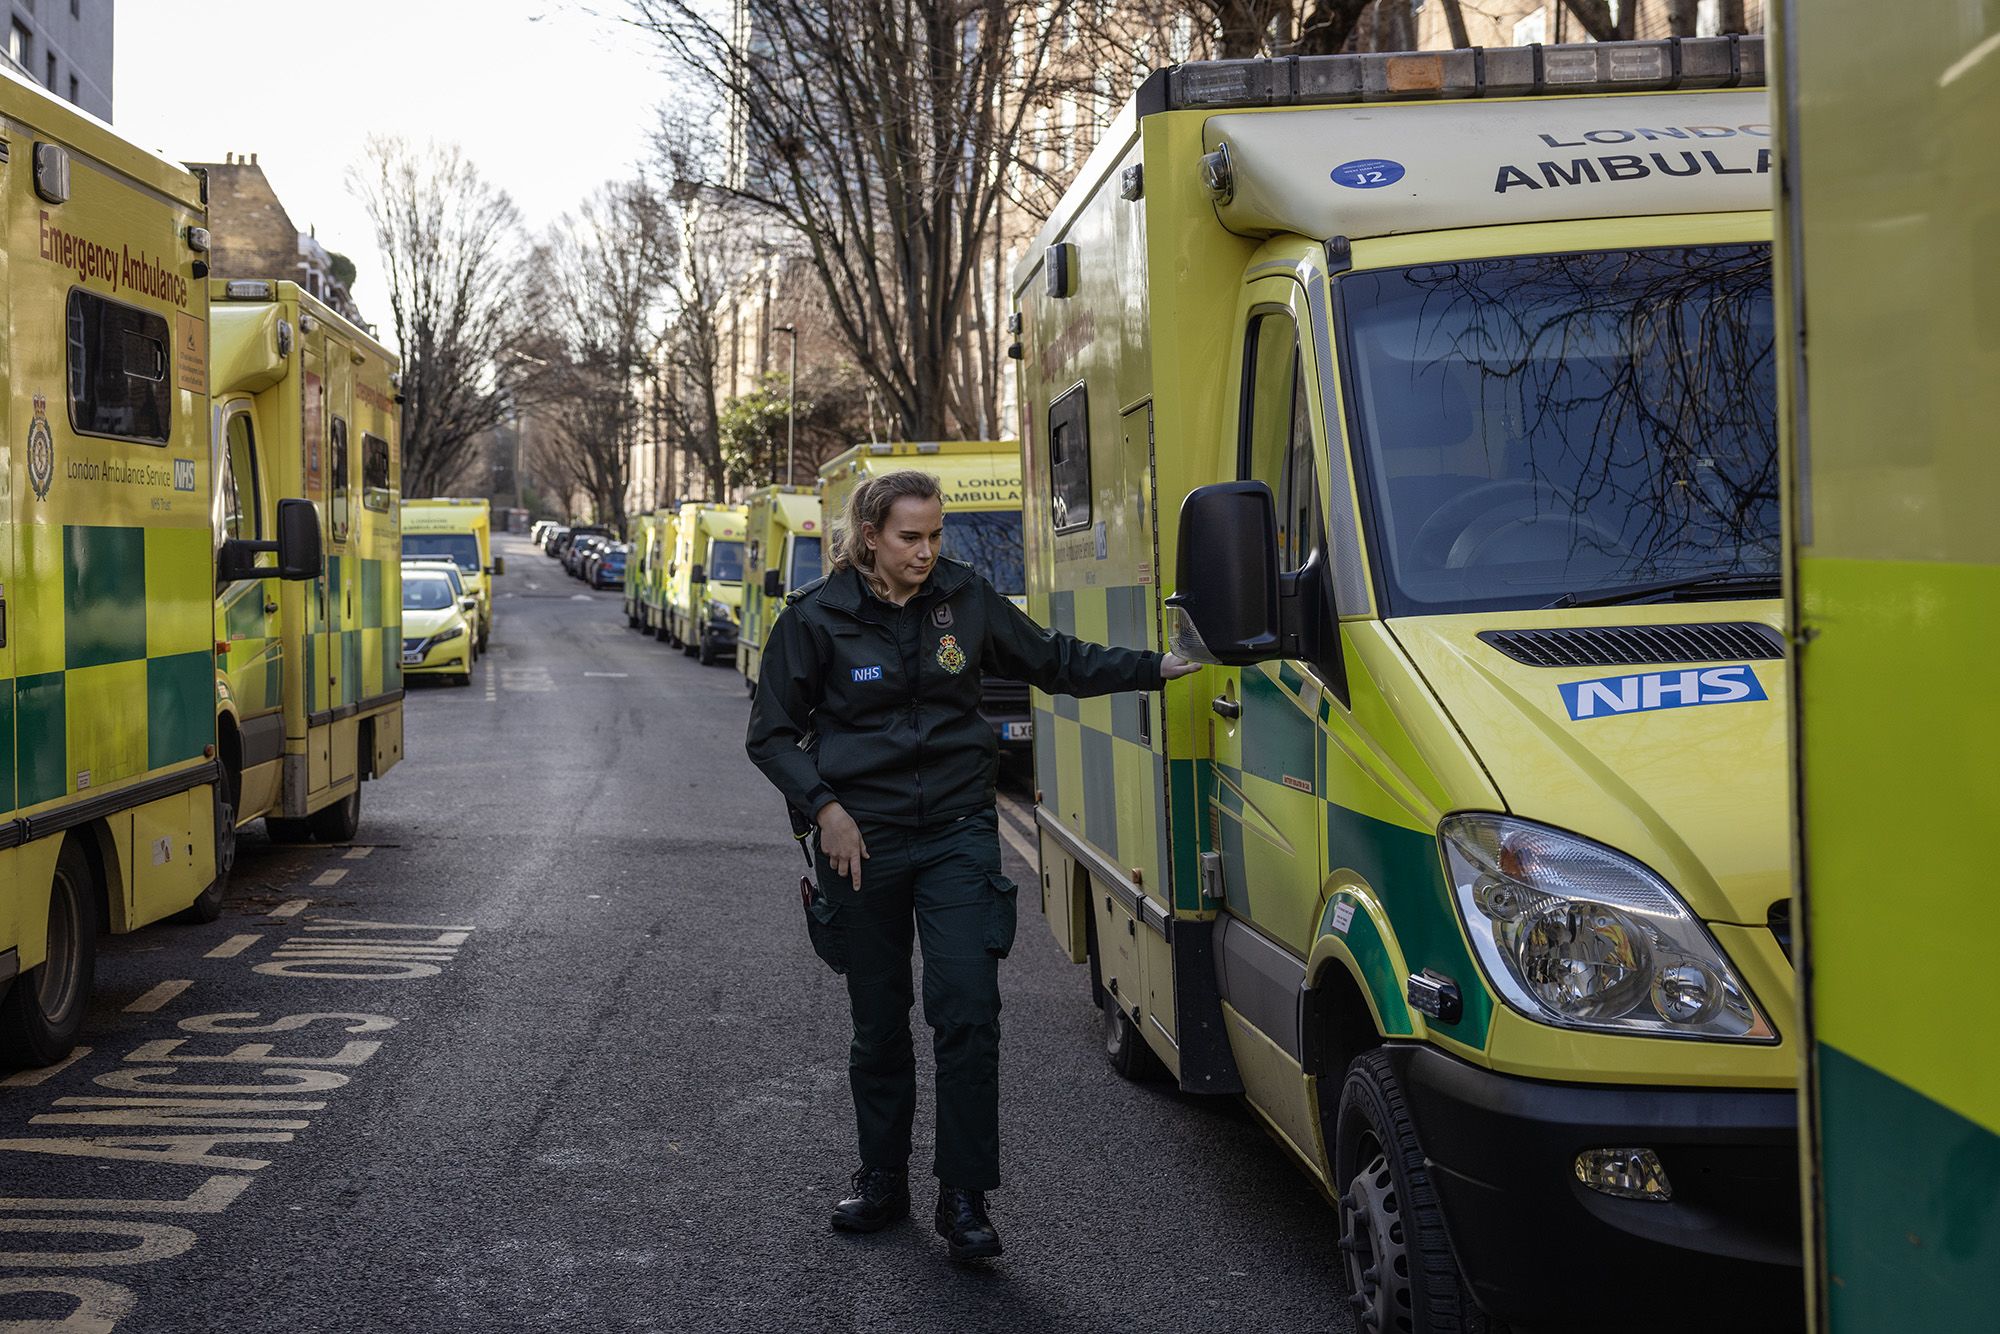 Emergency Services In UK: Police, Health, Fire And More